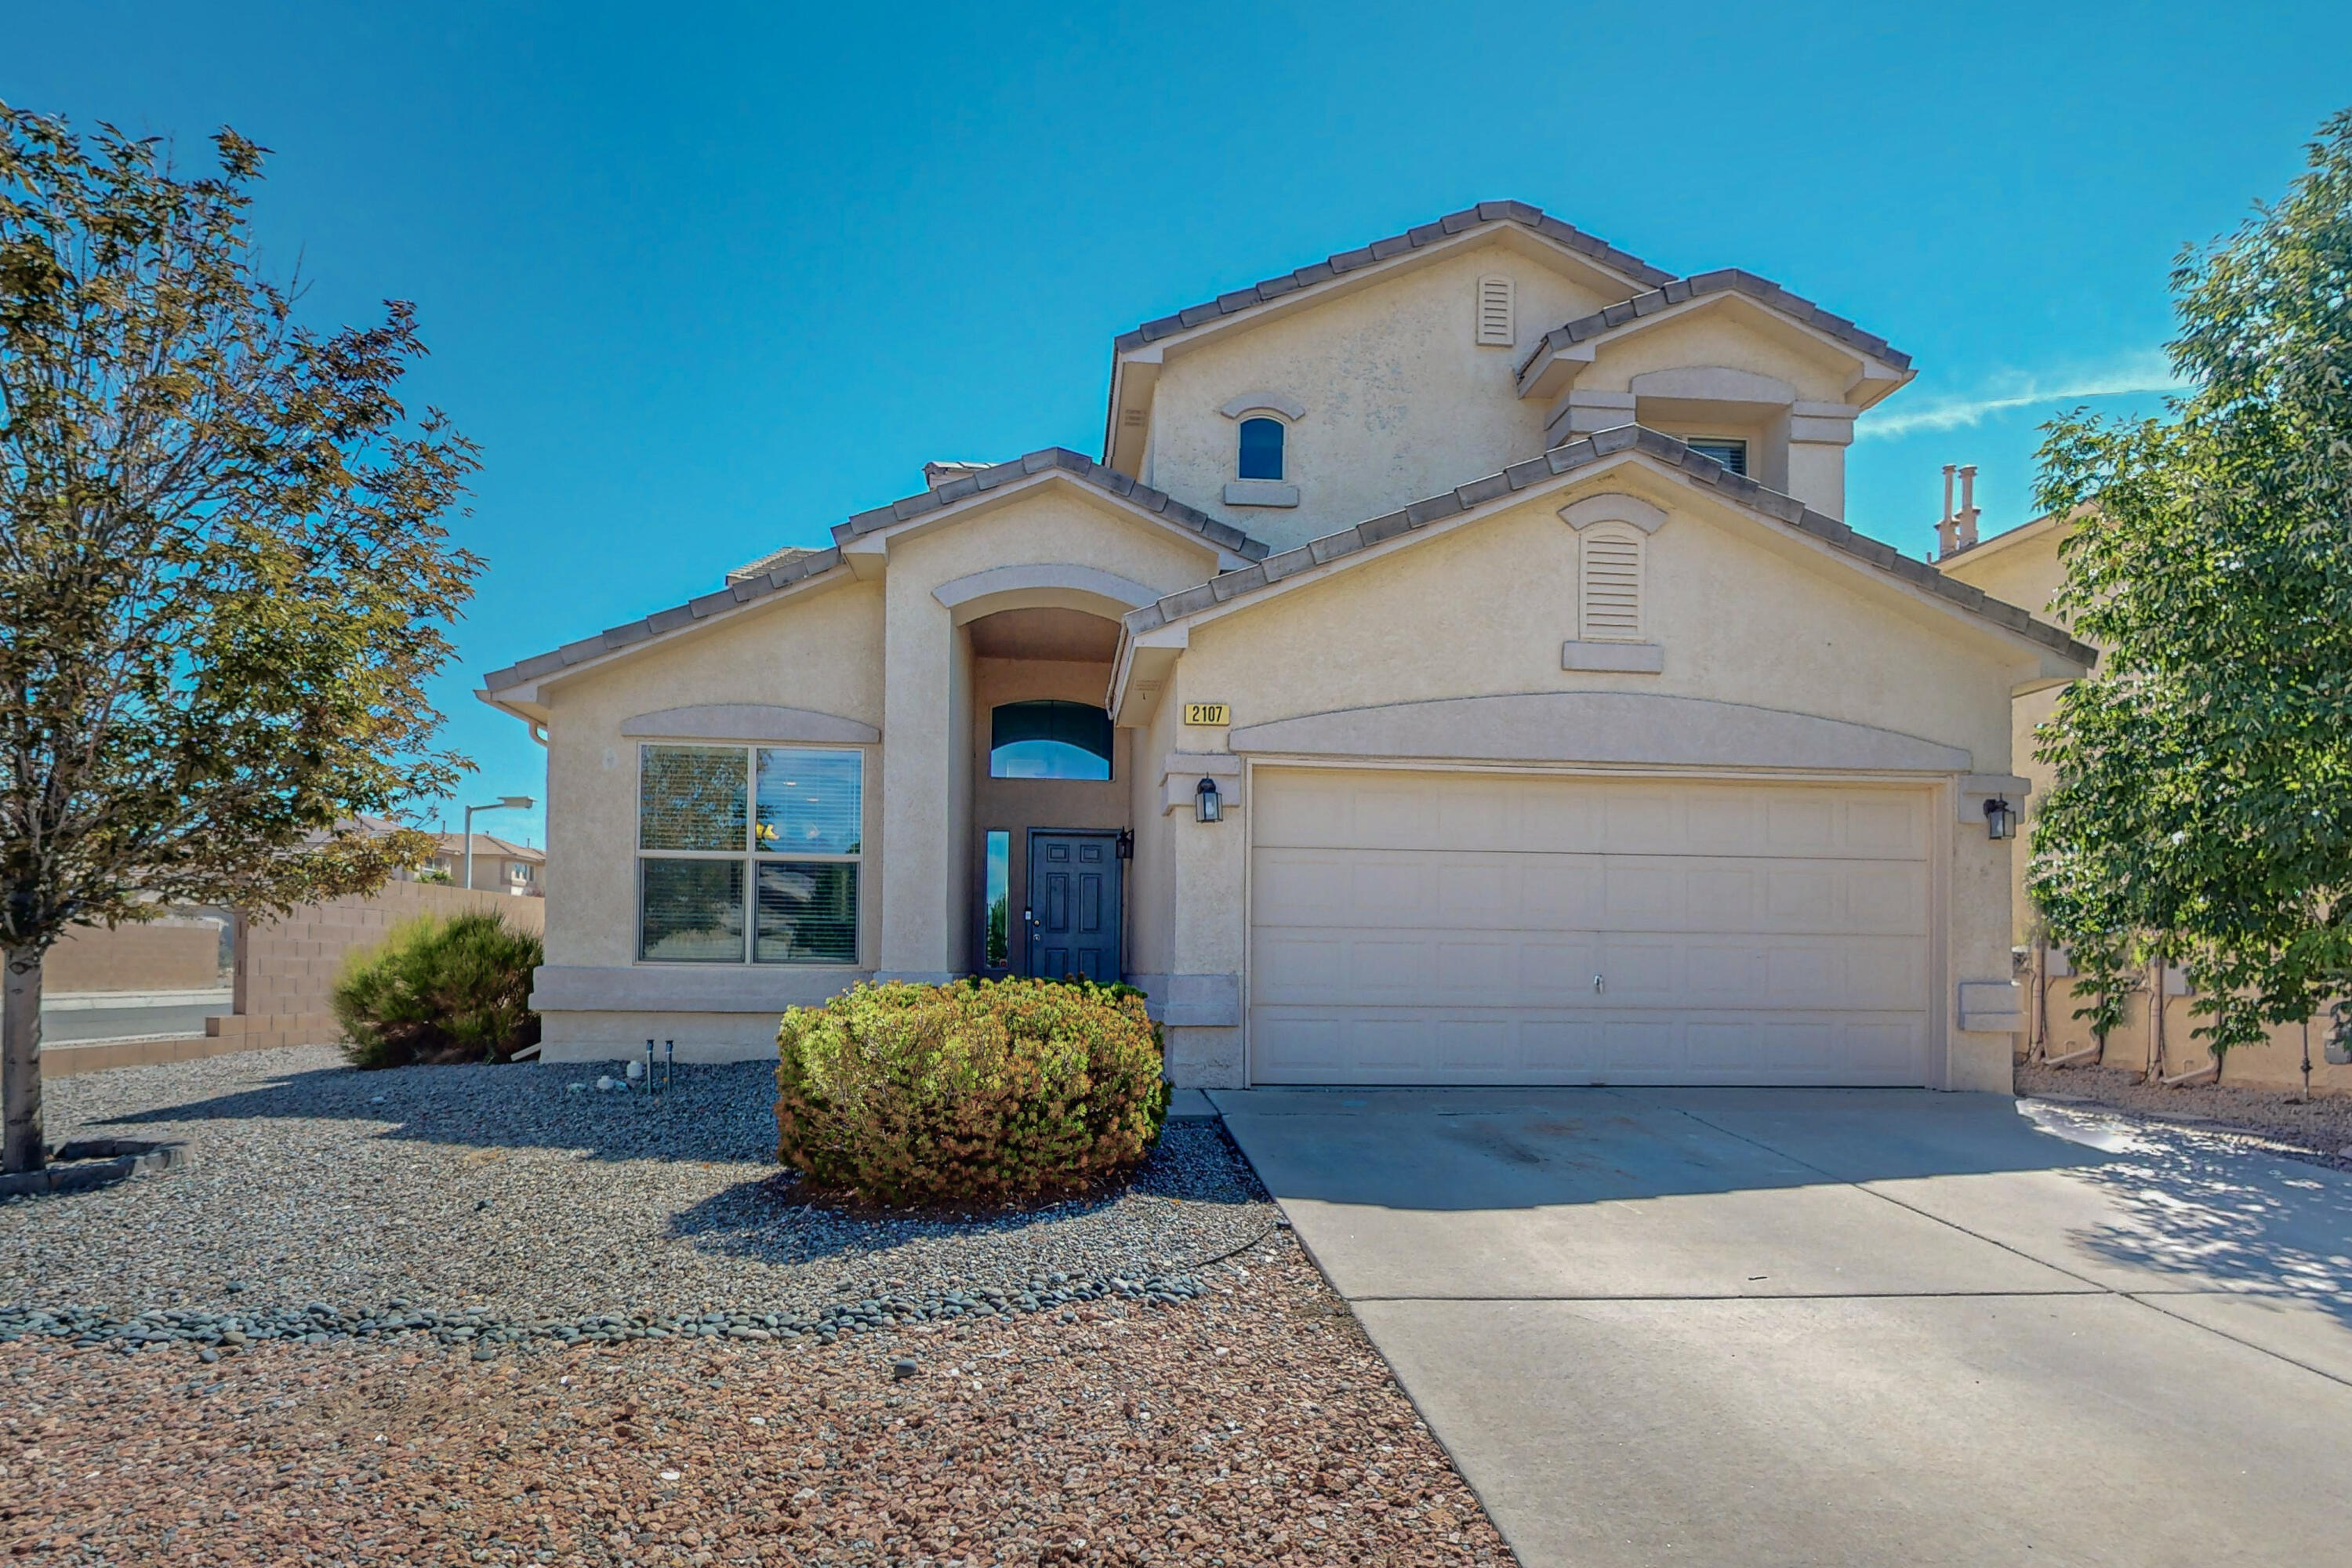 Welcome Home! To one of Rio Rancho's most desirable subdivision of Toscana at Cabezon. This community is located conveniently nearby walking trails, parks, schools, shopping center, and much more.This 2 story corner lot home features high windows for natural light, dining, kitchen with stainless steal appliances, and breakfast nook. Living room invites you to set the ambiance with a gas log fireplace and high ceilings. Primary bedroom with separate garden tub, shower, double vanity, and walk-in closet. Half bathroom, under the stairs closet are also located on the main floor. Upper lever holds an open loft with a balcony, Full bathroom and two spacious bedrooms with walk-in closets! Backyard is ready to host your fall gatherings underneath the Gazebo.